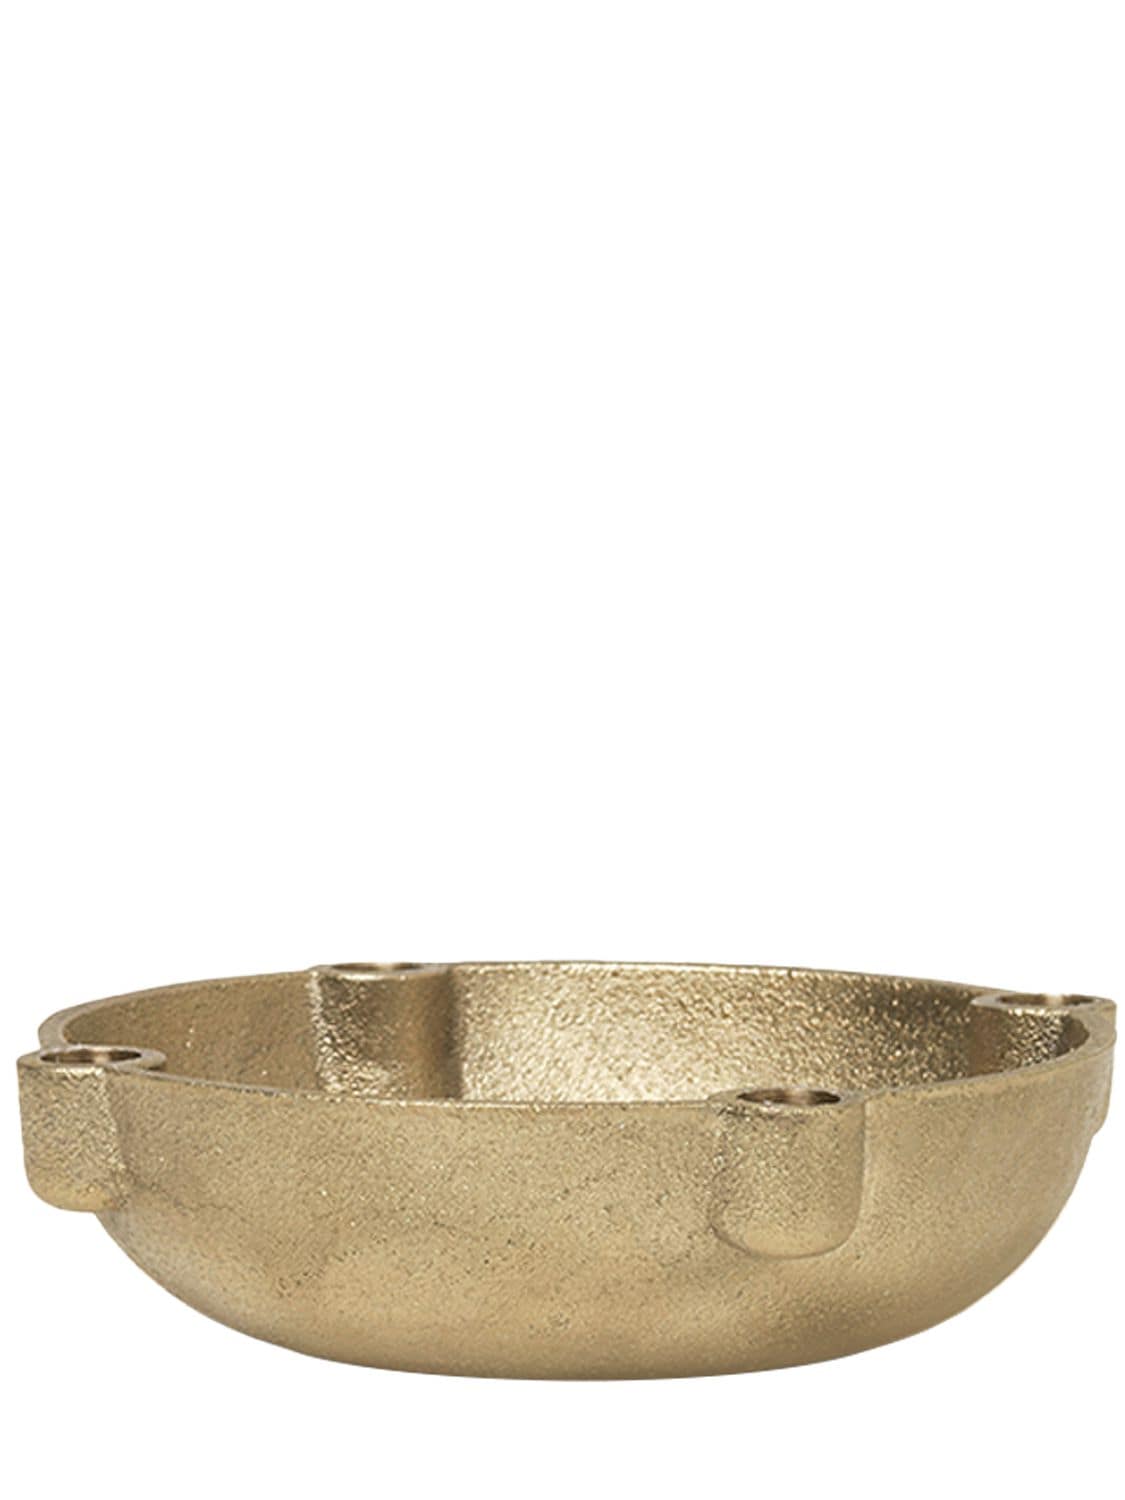 Small Casted Brass Bowl Candle Holder